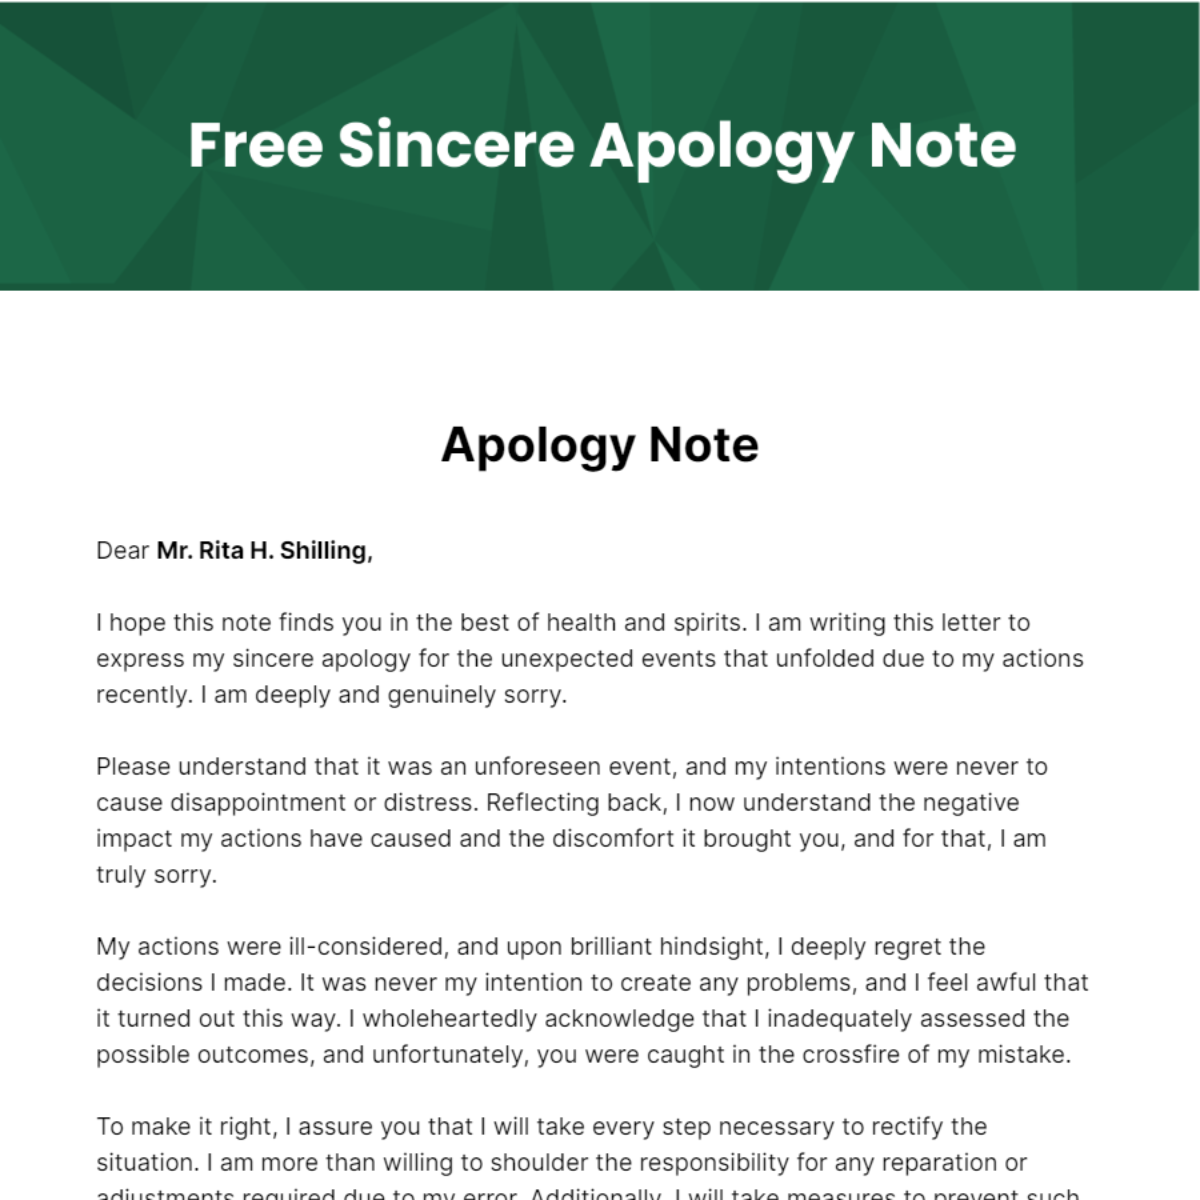 Free Sincere Apology Note Template